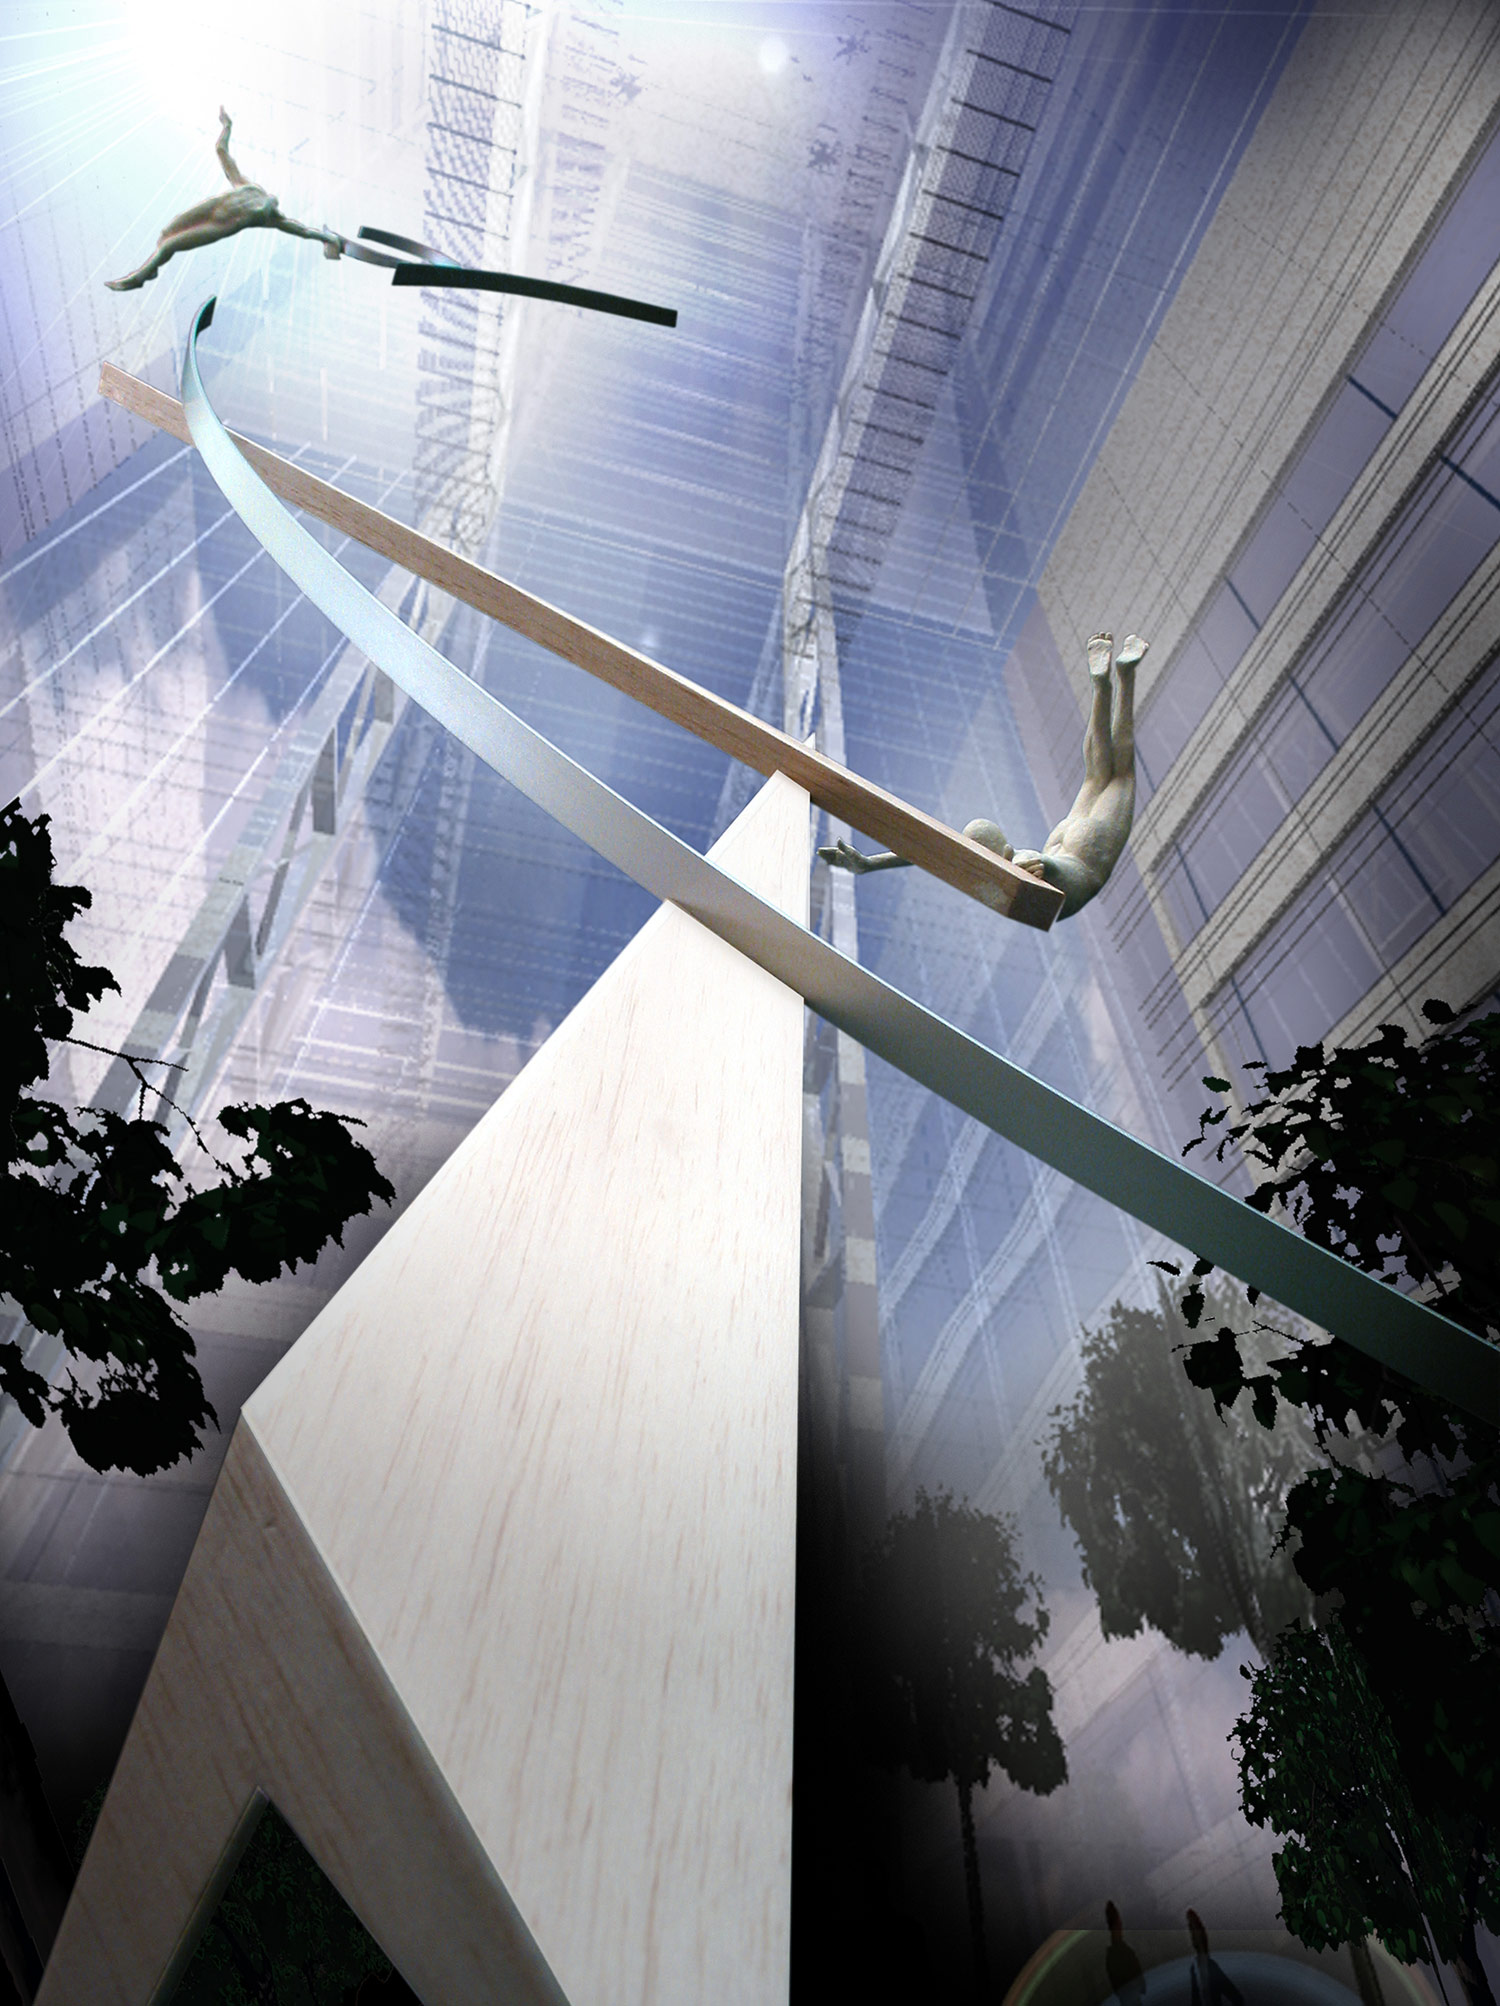 Archimedes Dream. 8. Canary Wharf. Pierre Diamantopoulo. Copyright.jpg